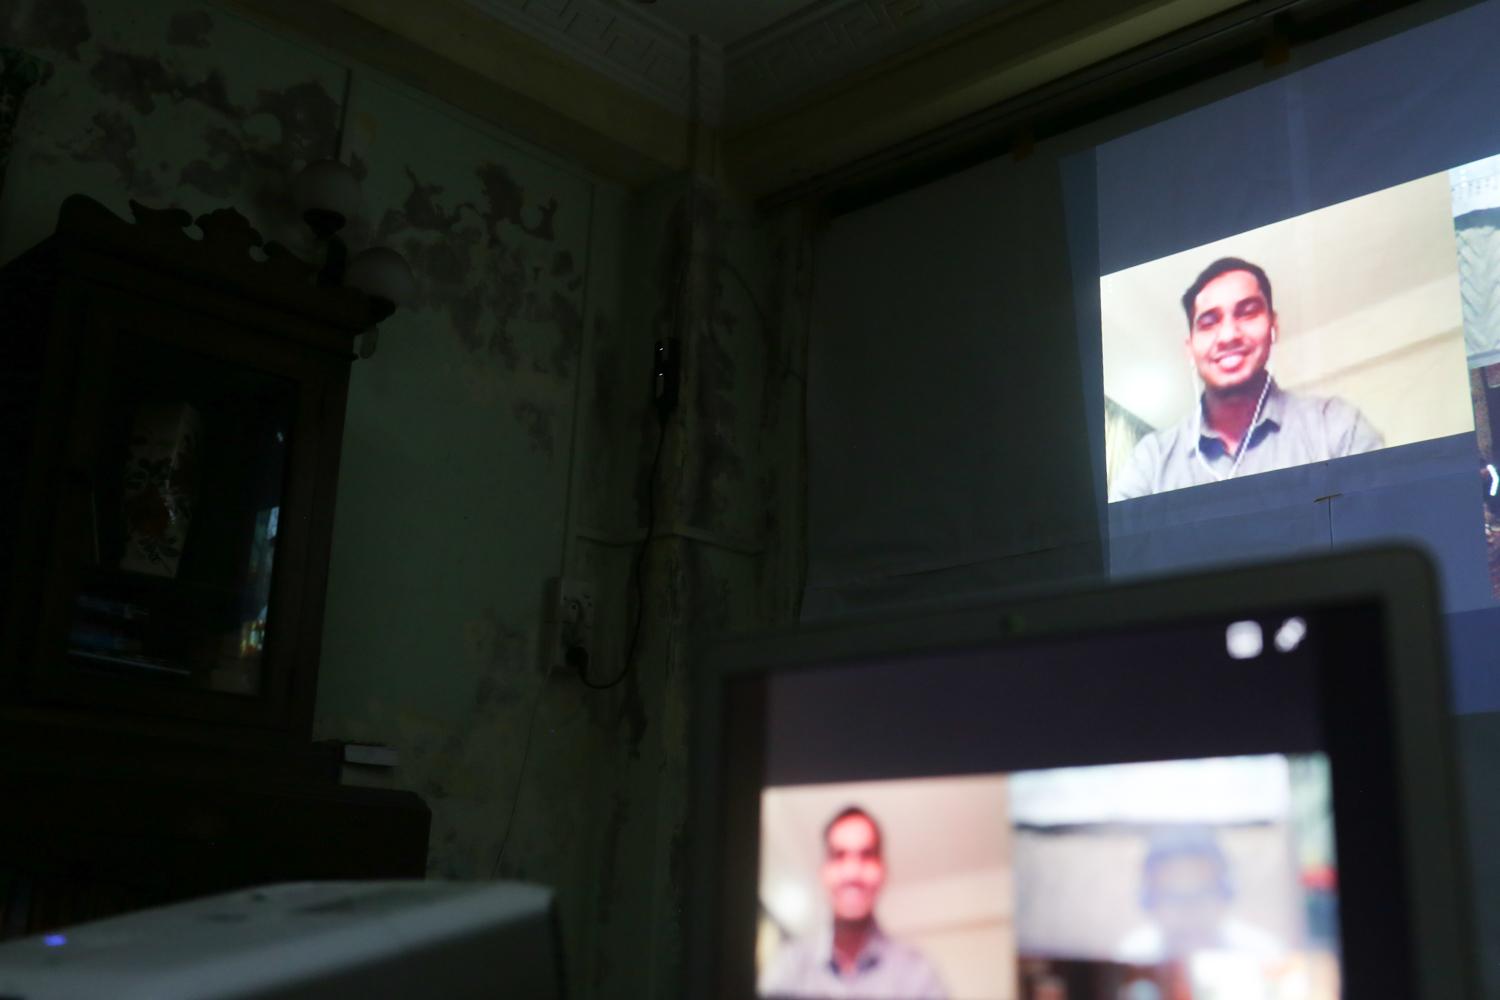 A man appears on a large screen wearing headphones in a video call